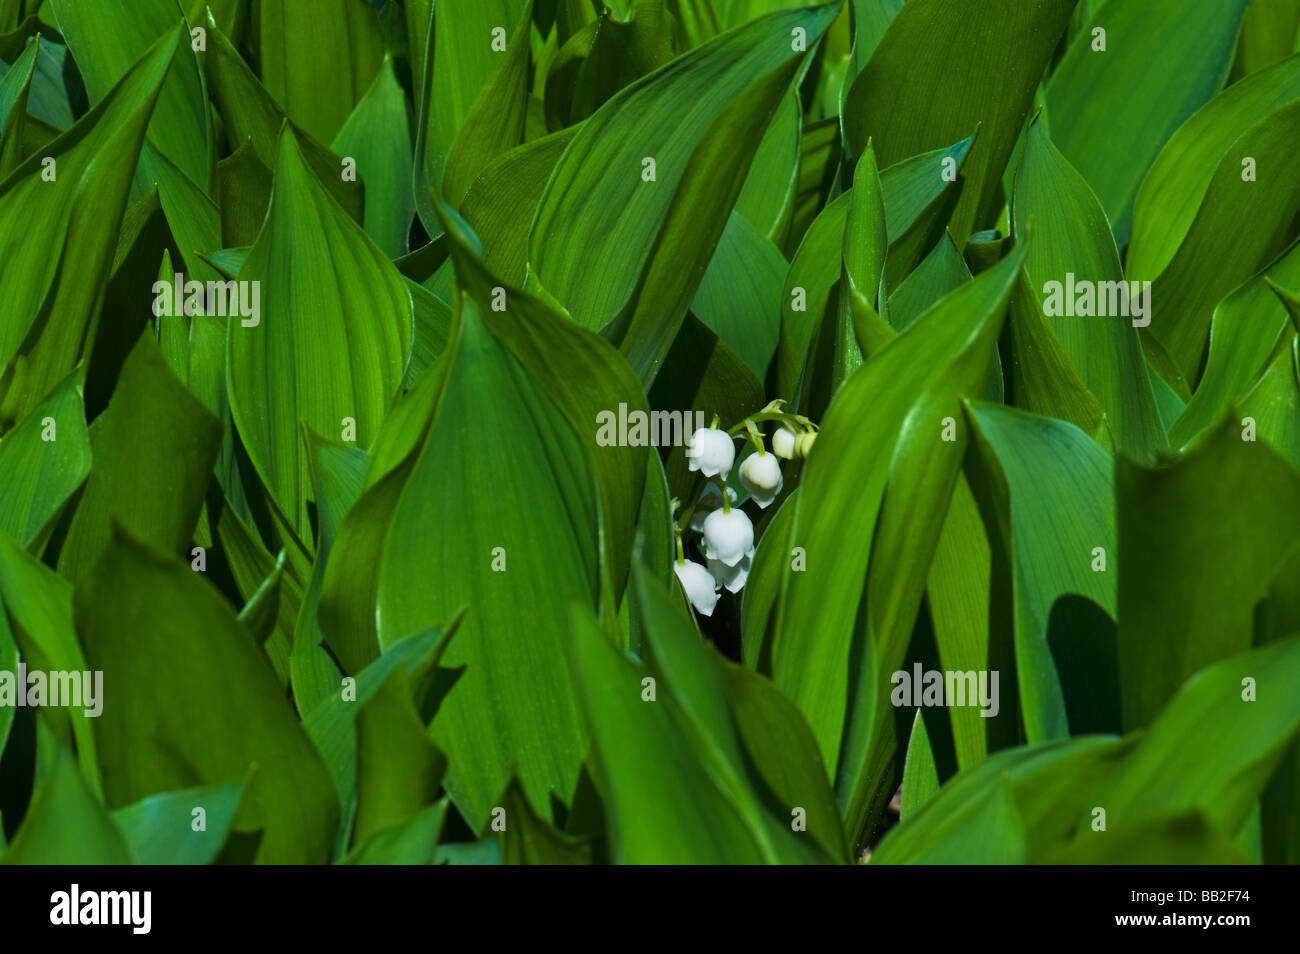 lilly of the valley liliaceae Convallaria majalis L. convallotoxin toxin toxic spring mai green background flower flowering sing Stock Photo